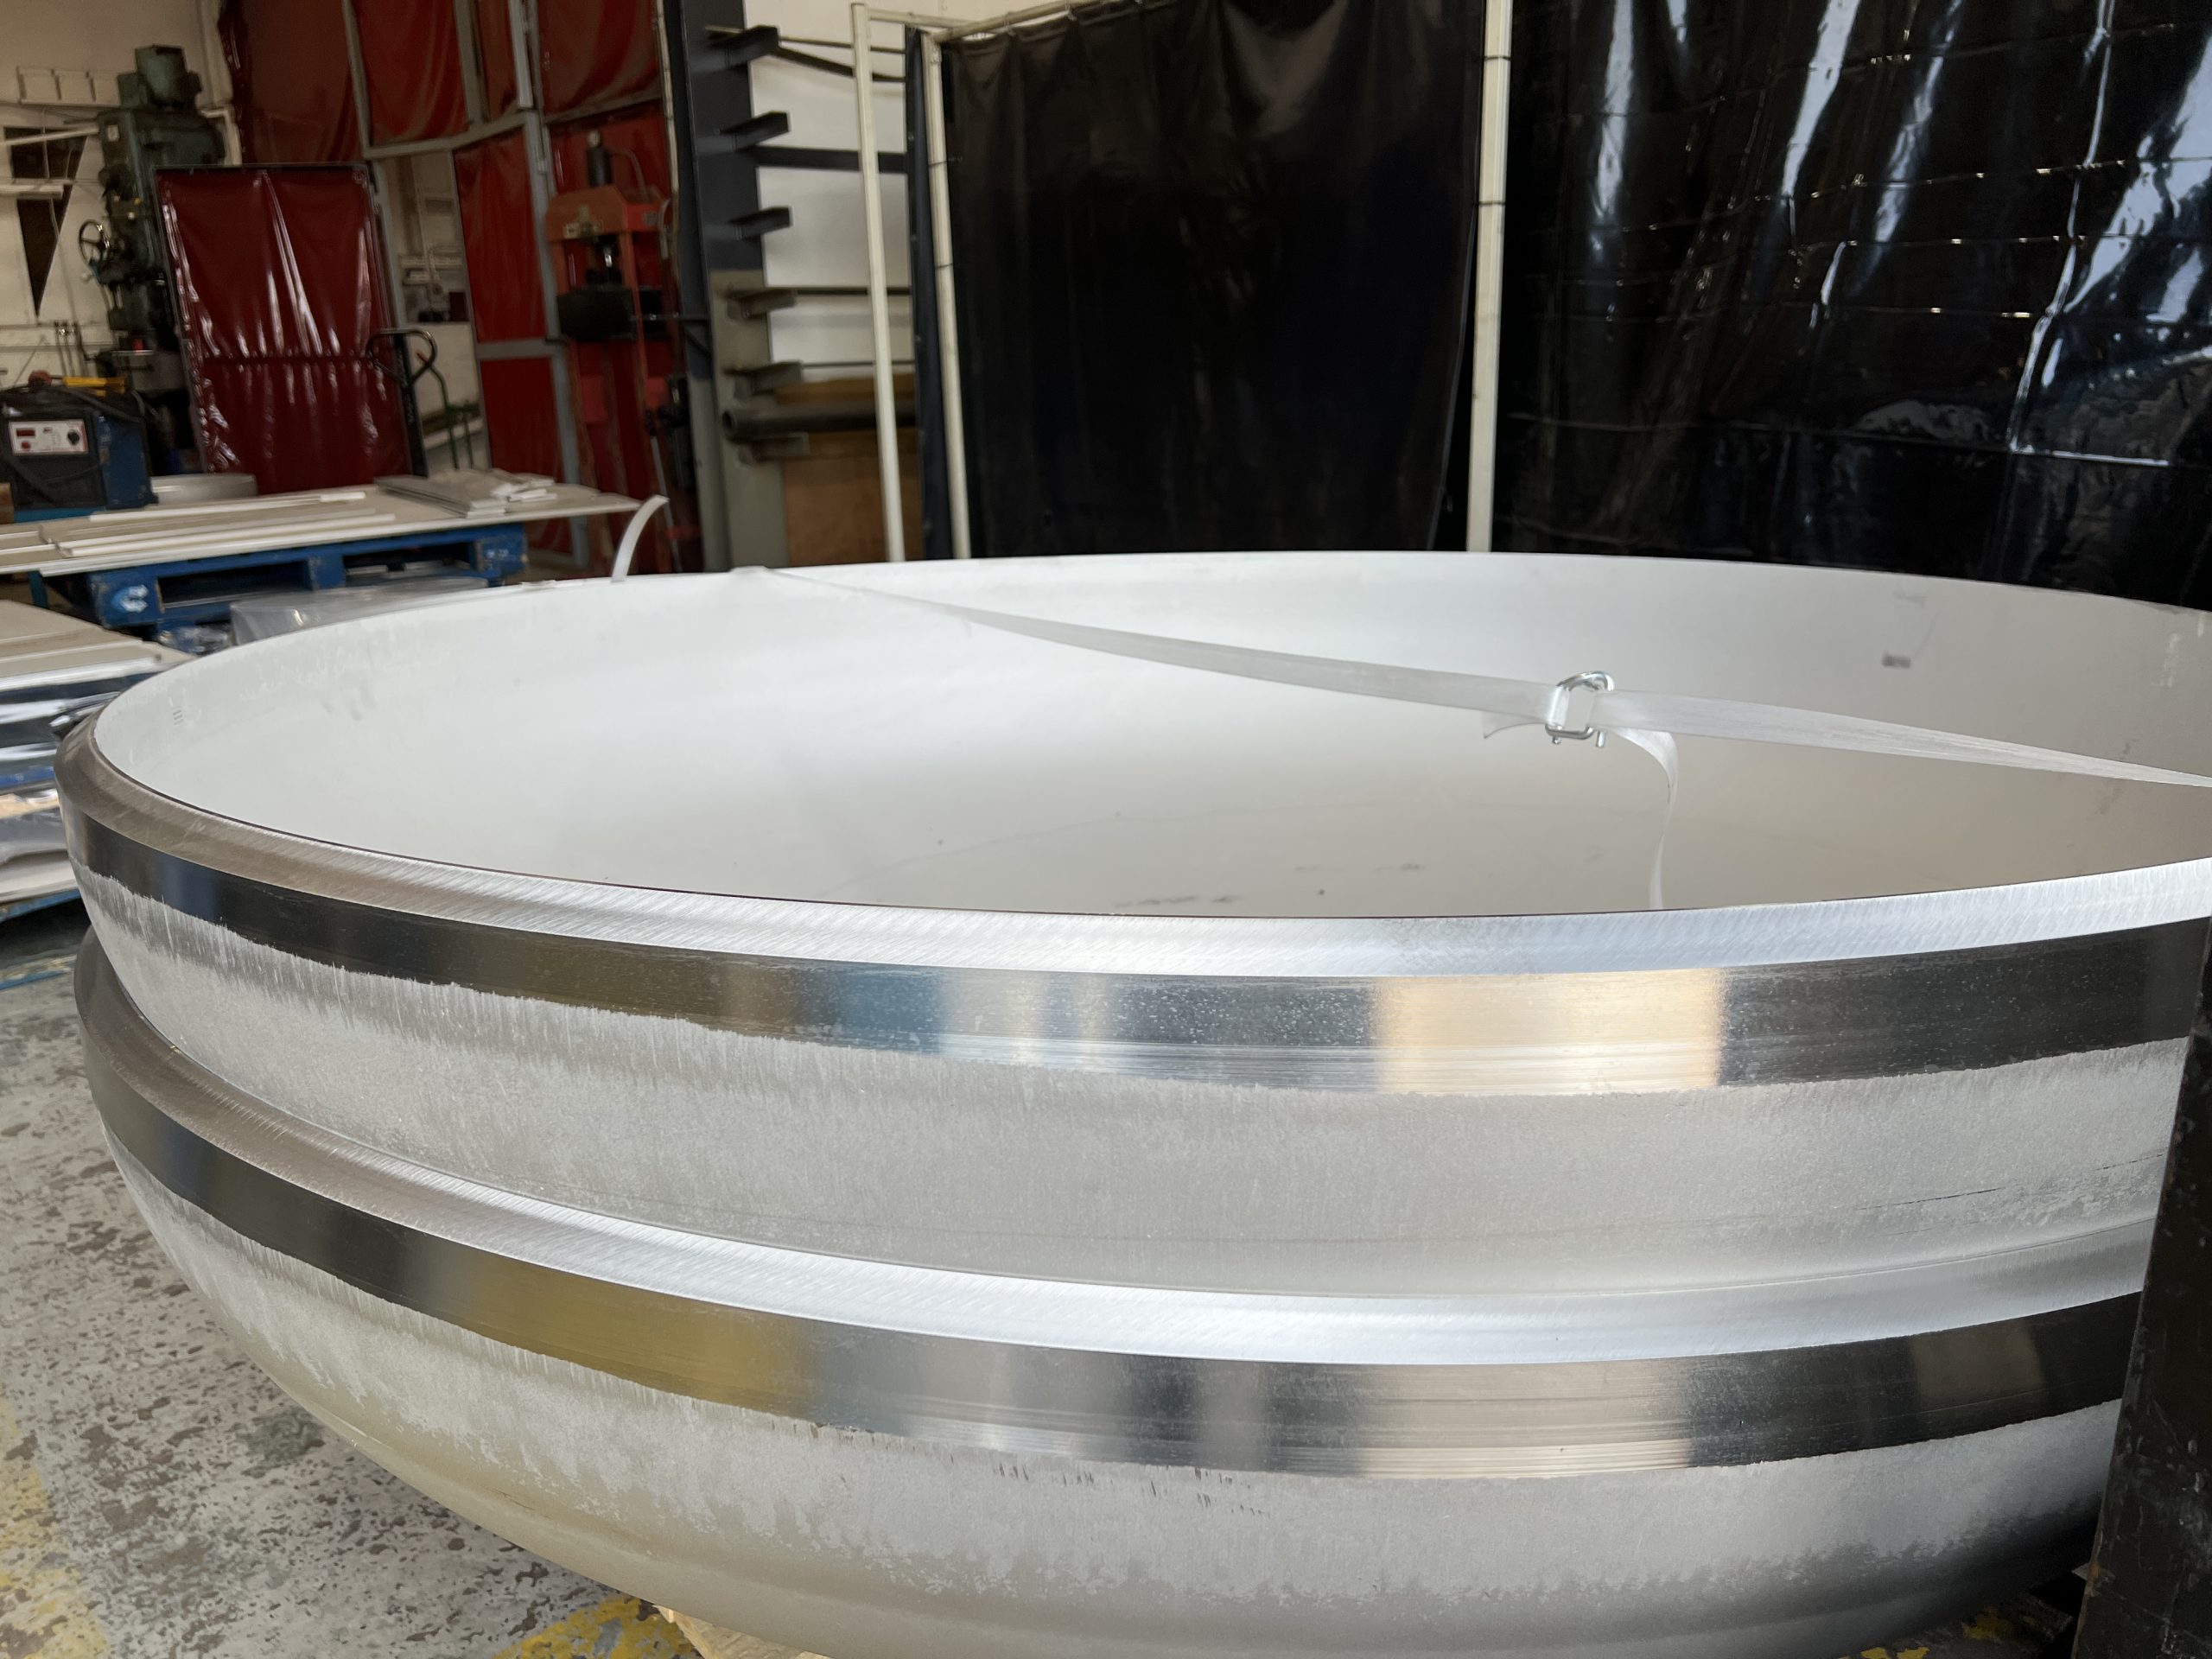 7350 Litre Surge Vessel Stainless steel for the UK water industry custom made in Tamworth at CPE Pressure vessels